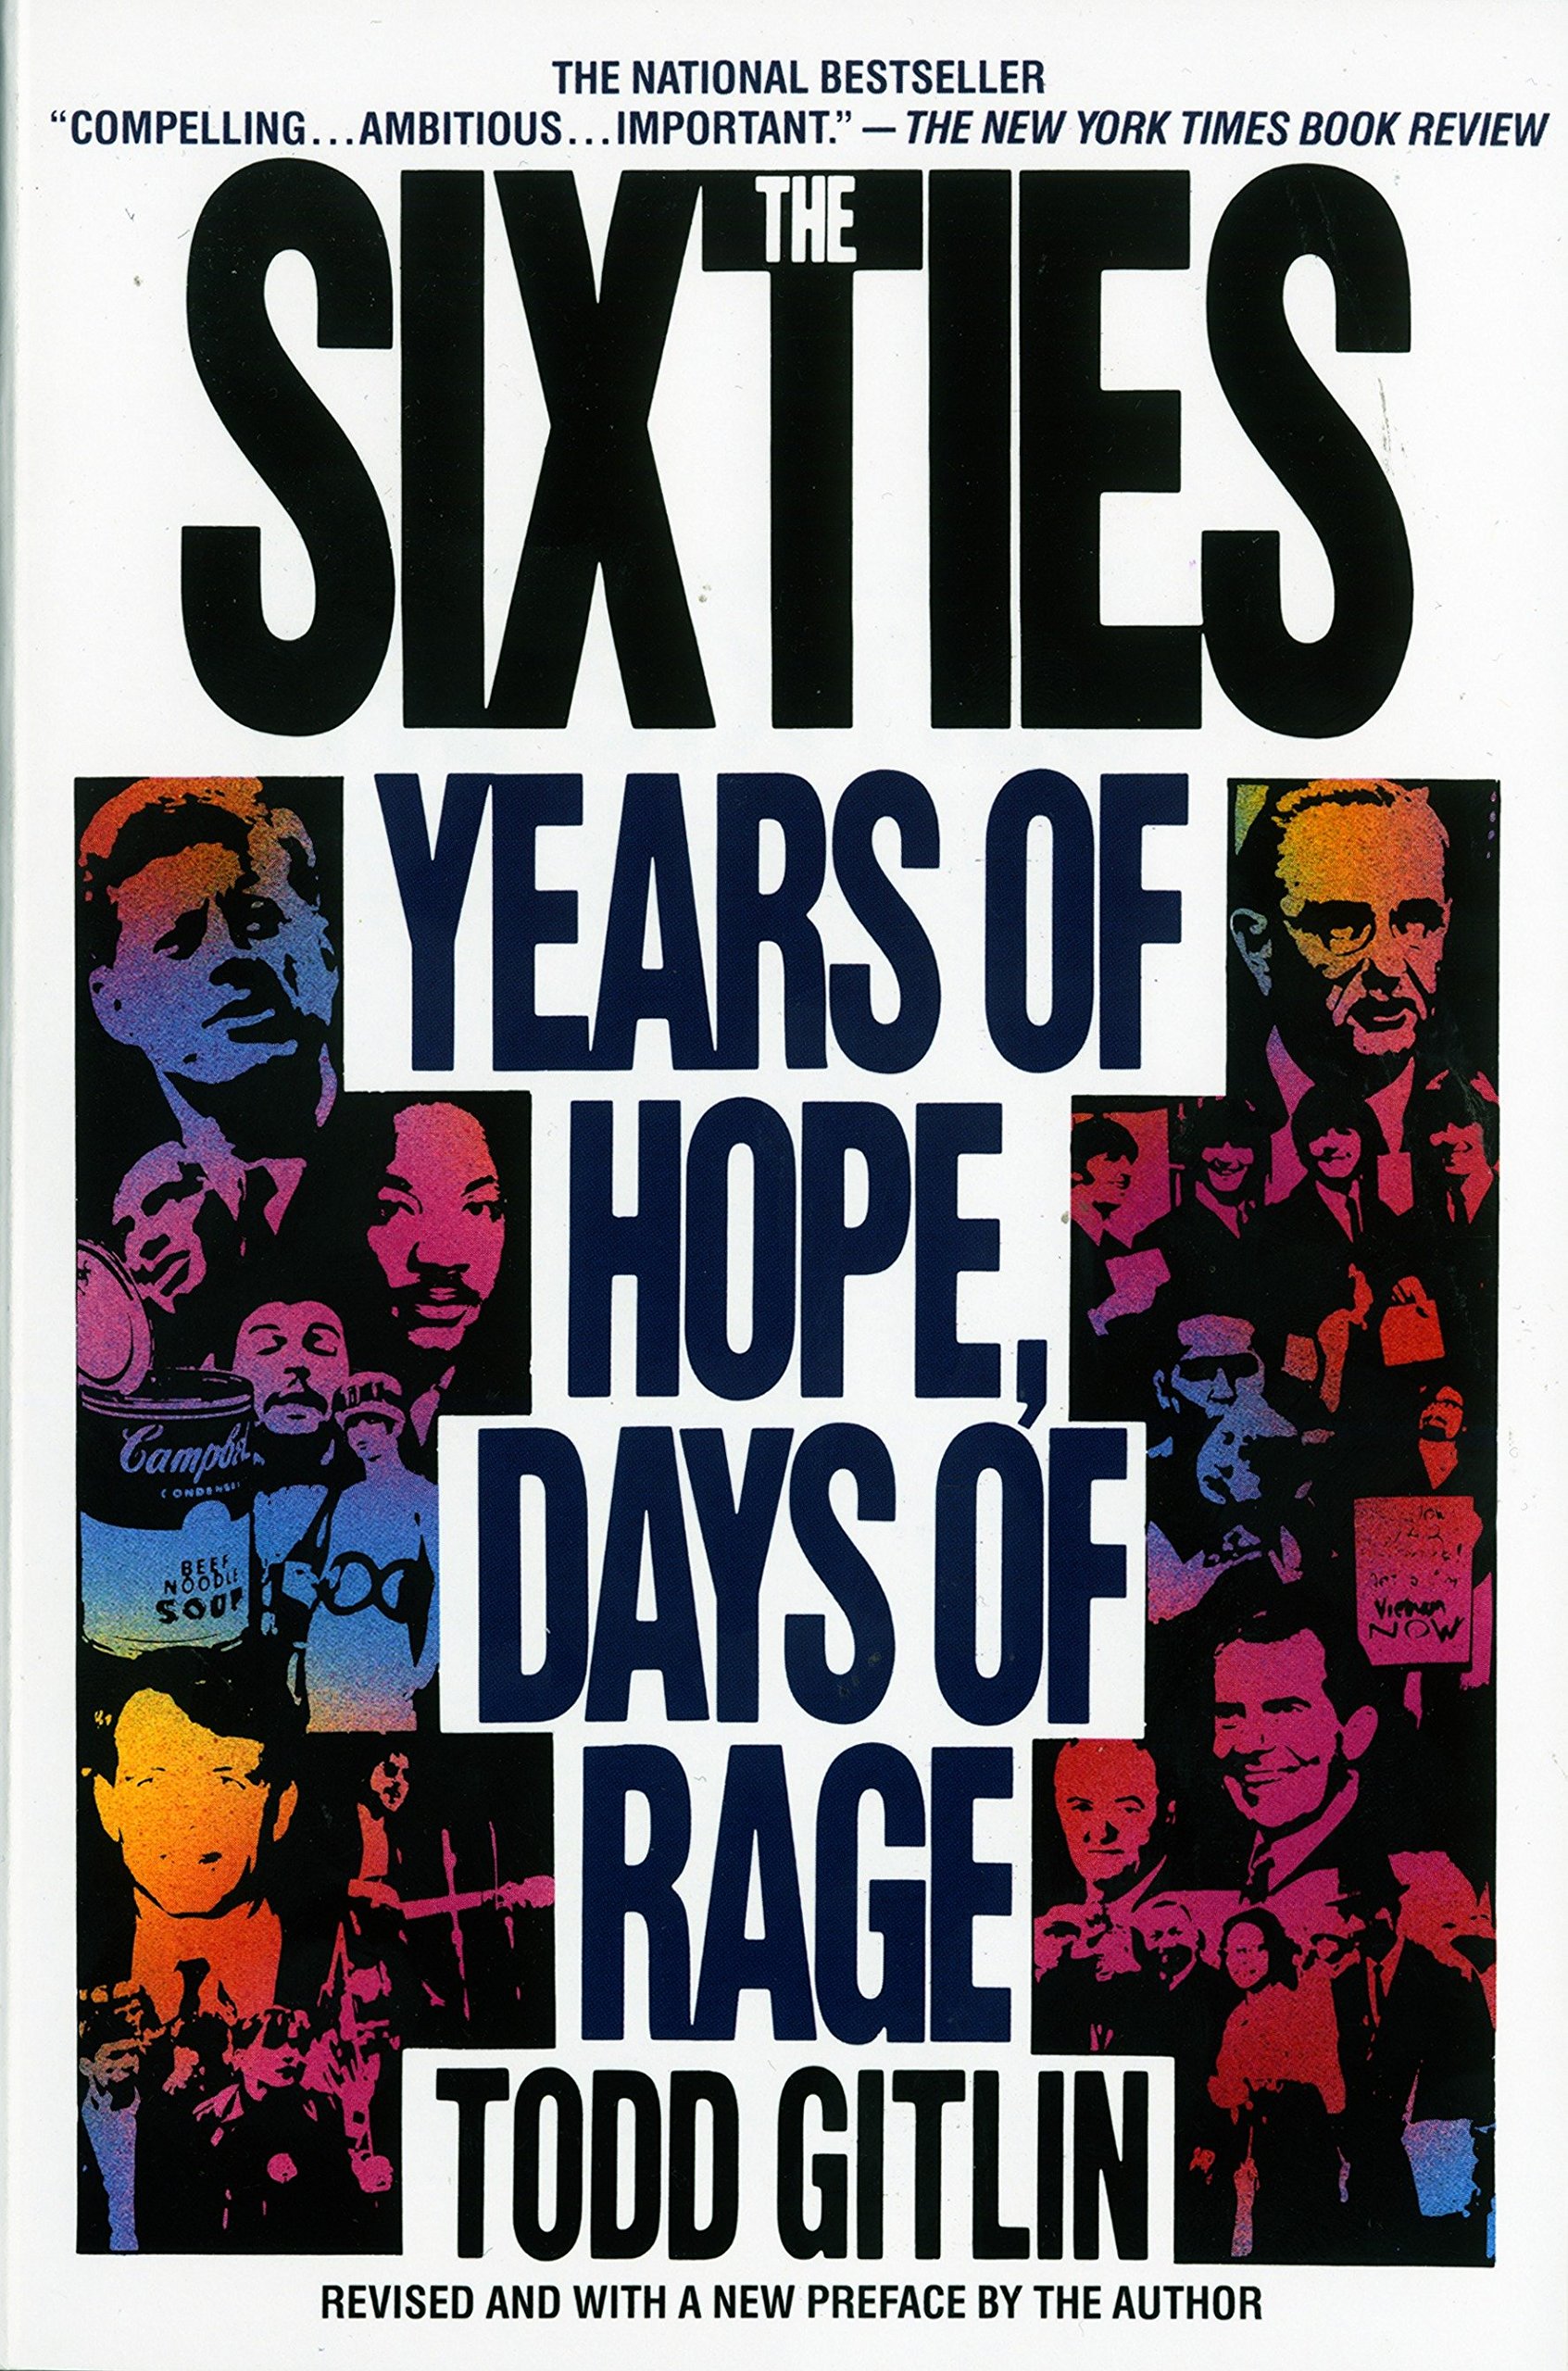 The Sixties: Years of Hope, Days of Rage book cover